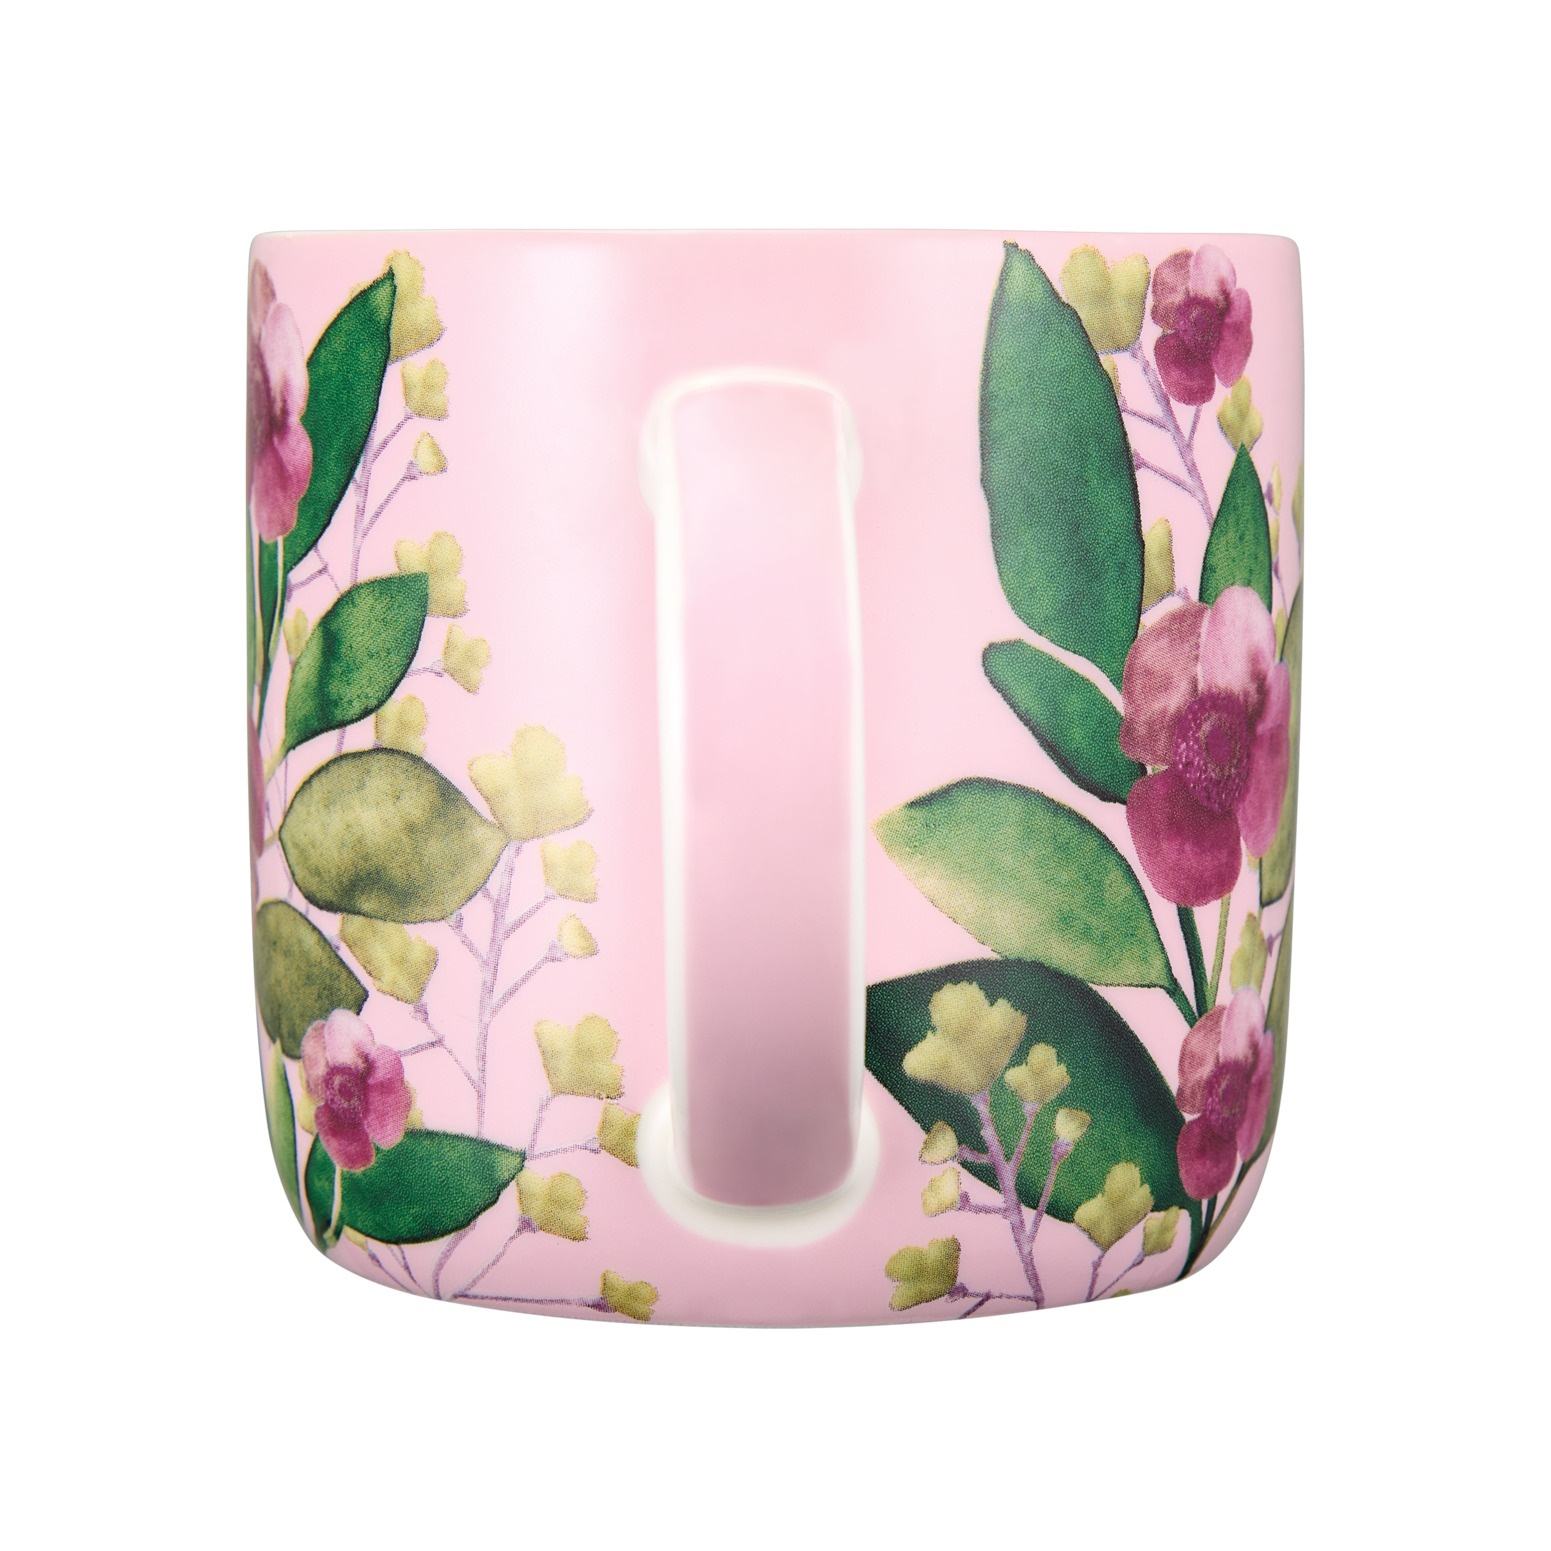 Maxwell & Williams Bouquet Mug 480ML Pink Gift Boxed